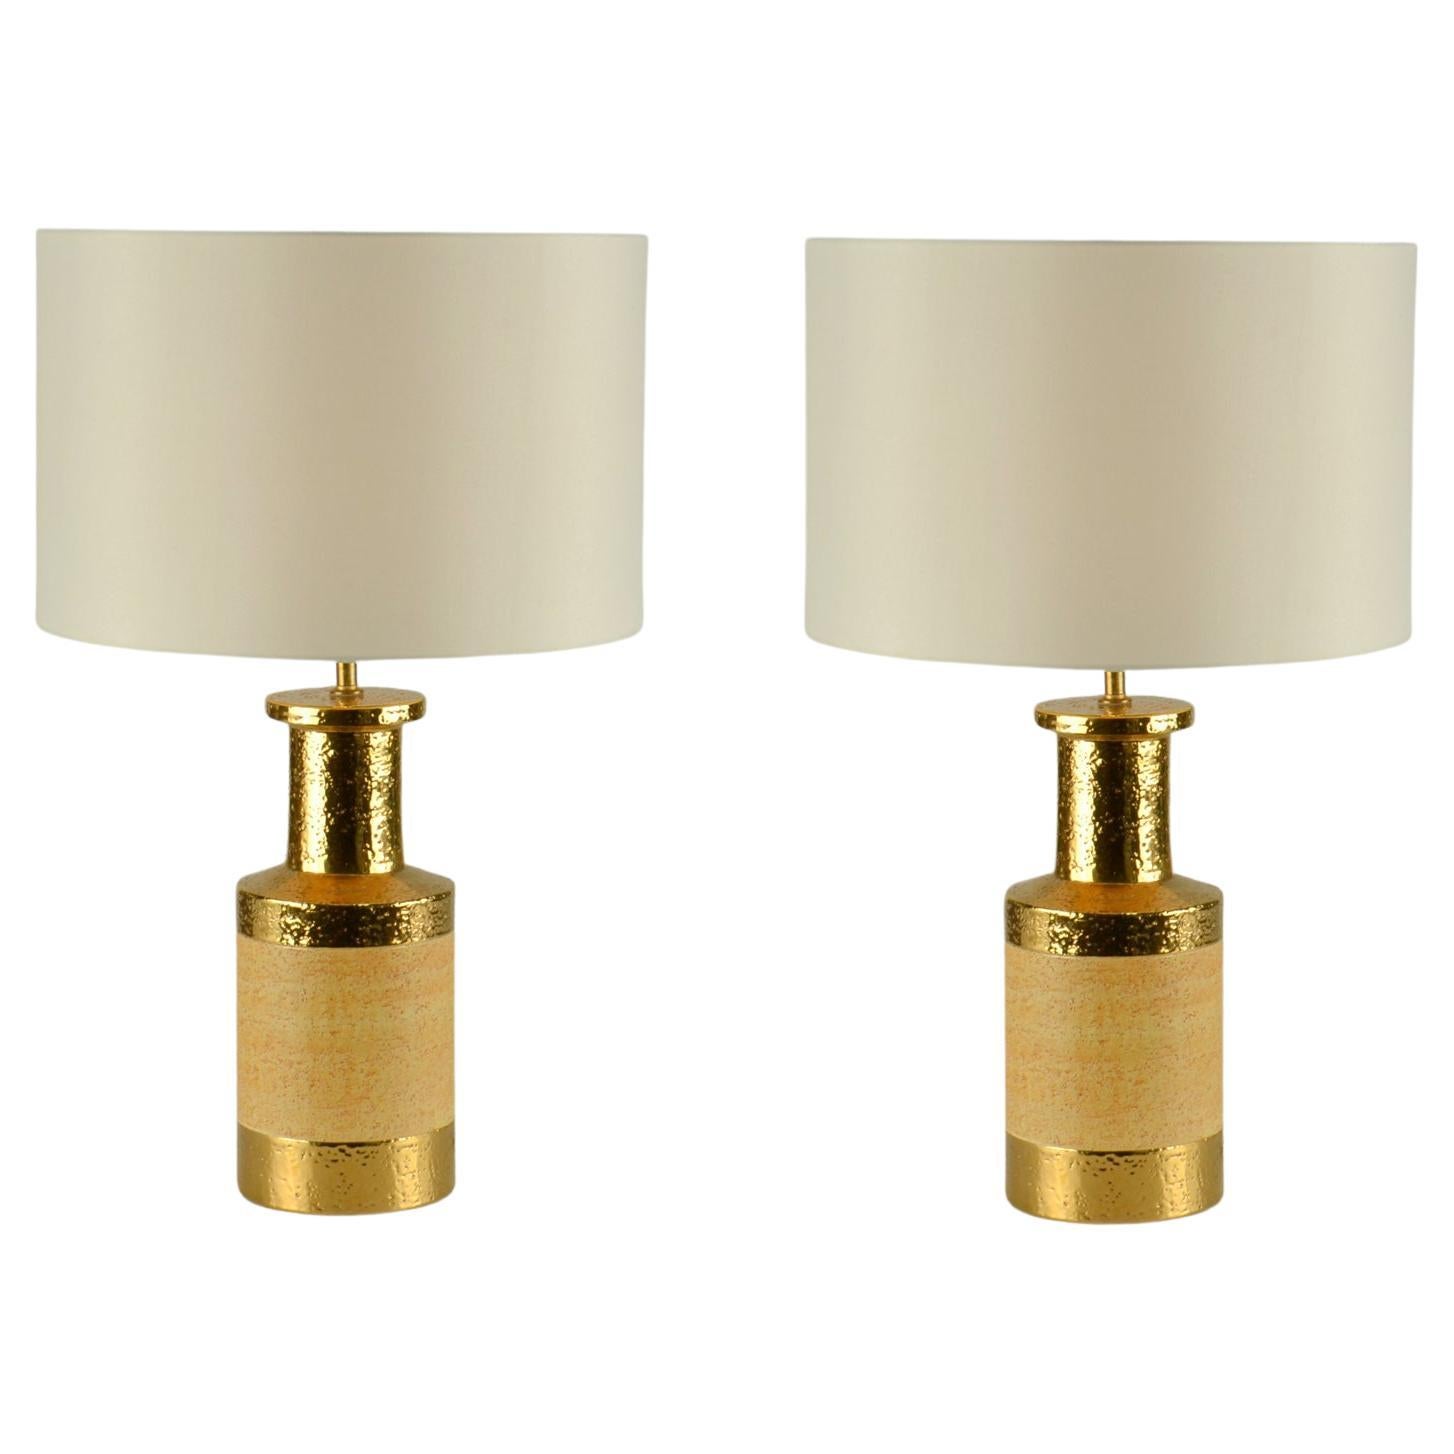 Pair of Bitossi Gilded Stoneware Ceramic Table Lamps, Italy 1970s